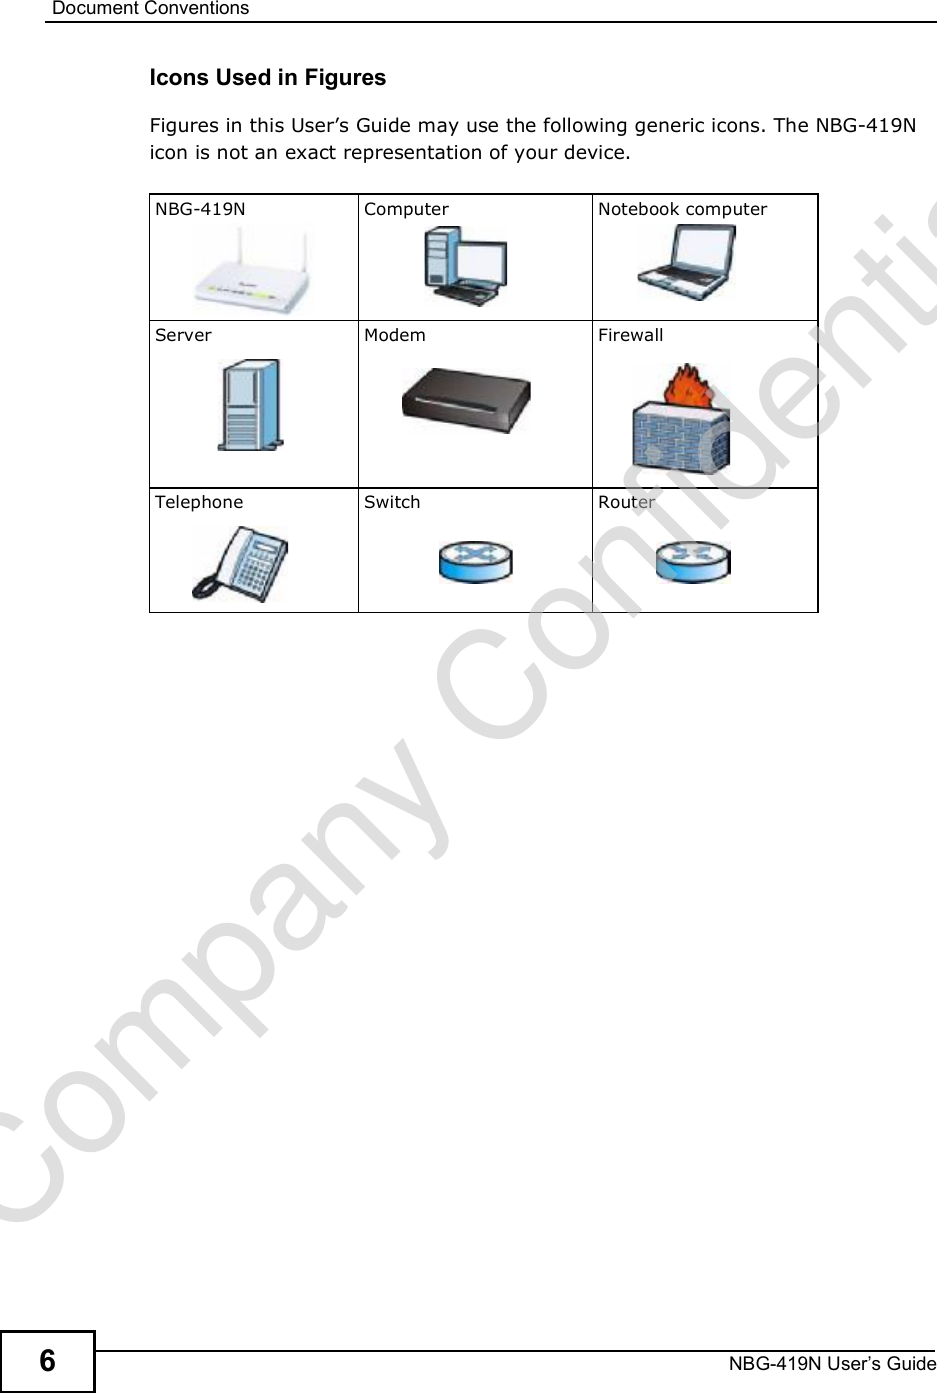 Document ConventionsNBG-419N User s Guide6Icons Used in FiguresFigures in this User!s Guide may use the following generic icons. The NBG-419N icon is not an exact representation of your device.NBG-419N Computer Notebook computerServer Modem FirewallTelephone Switch RouterCompany Confidential